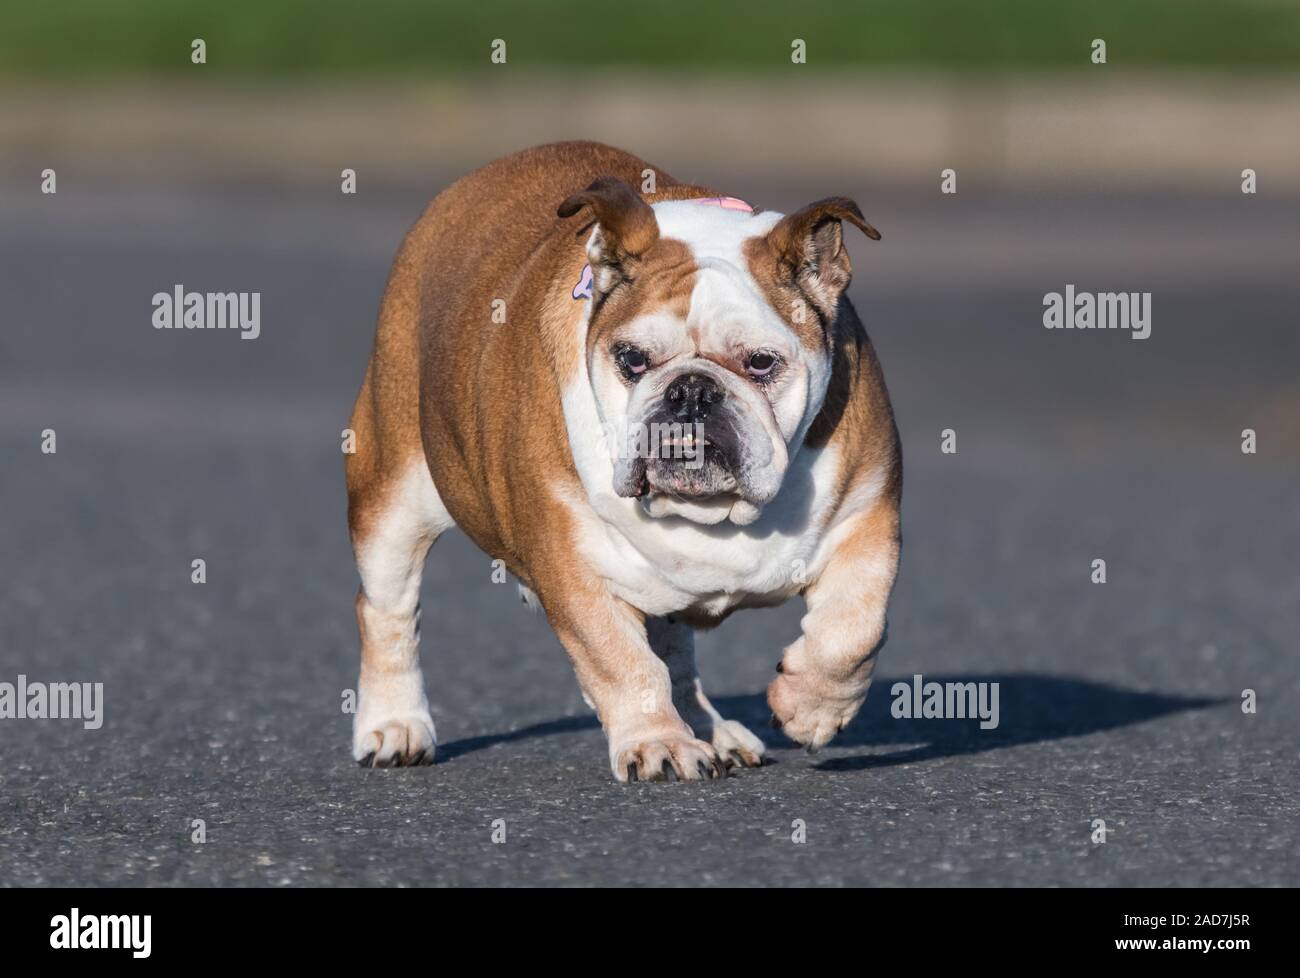 Bulldog running hires stock photography and images Alamy